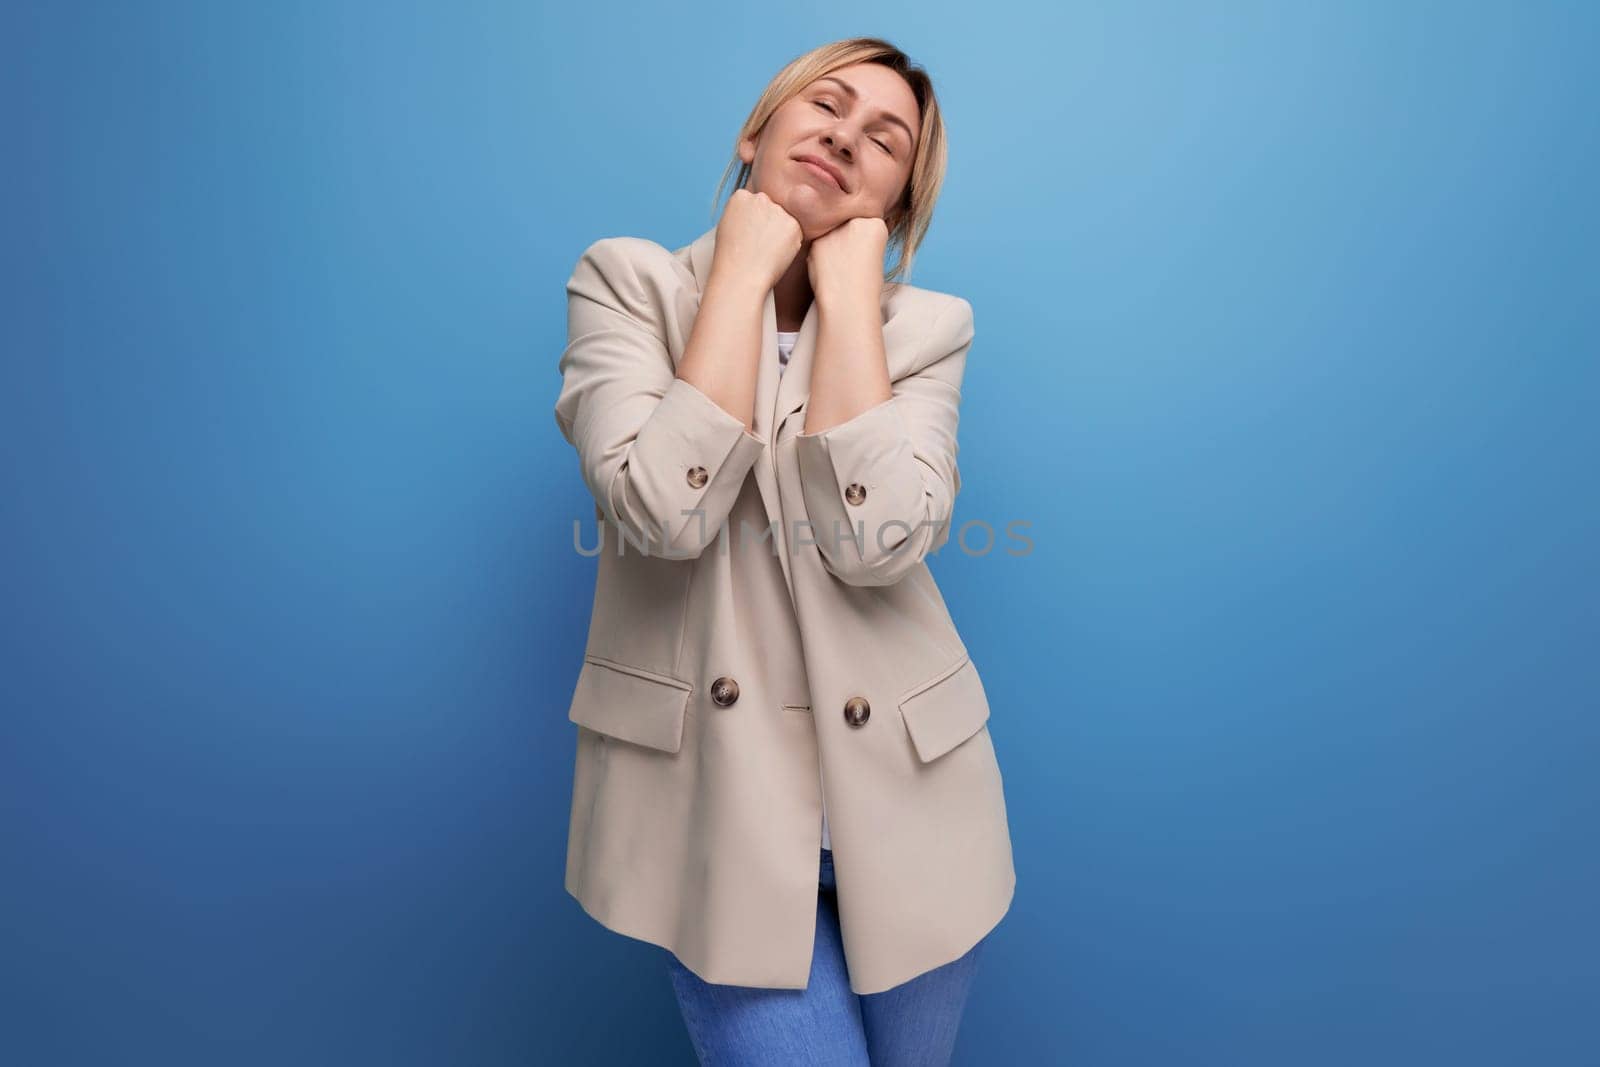 dreaming 30 year old woman in a jacket with blond hair on a studio background with copy space by TRMK